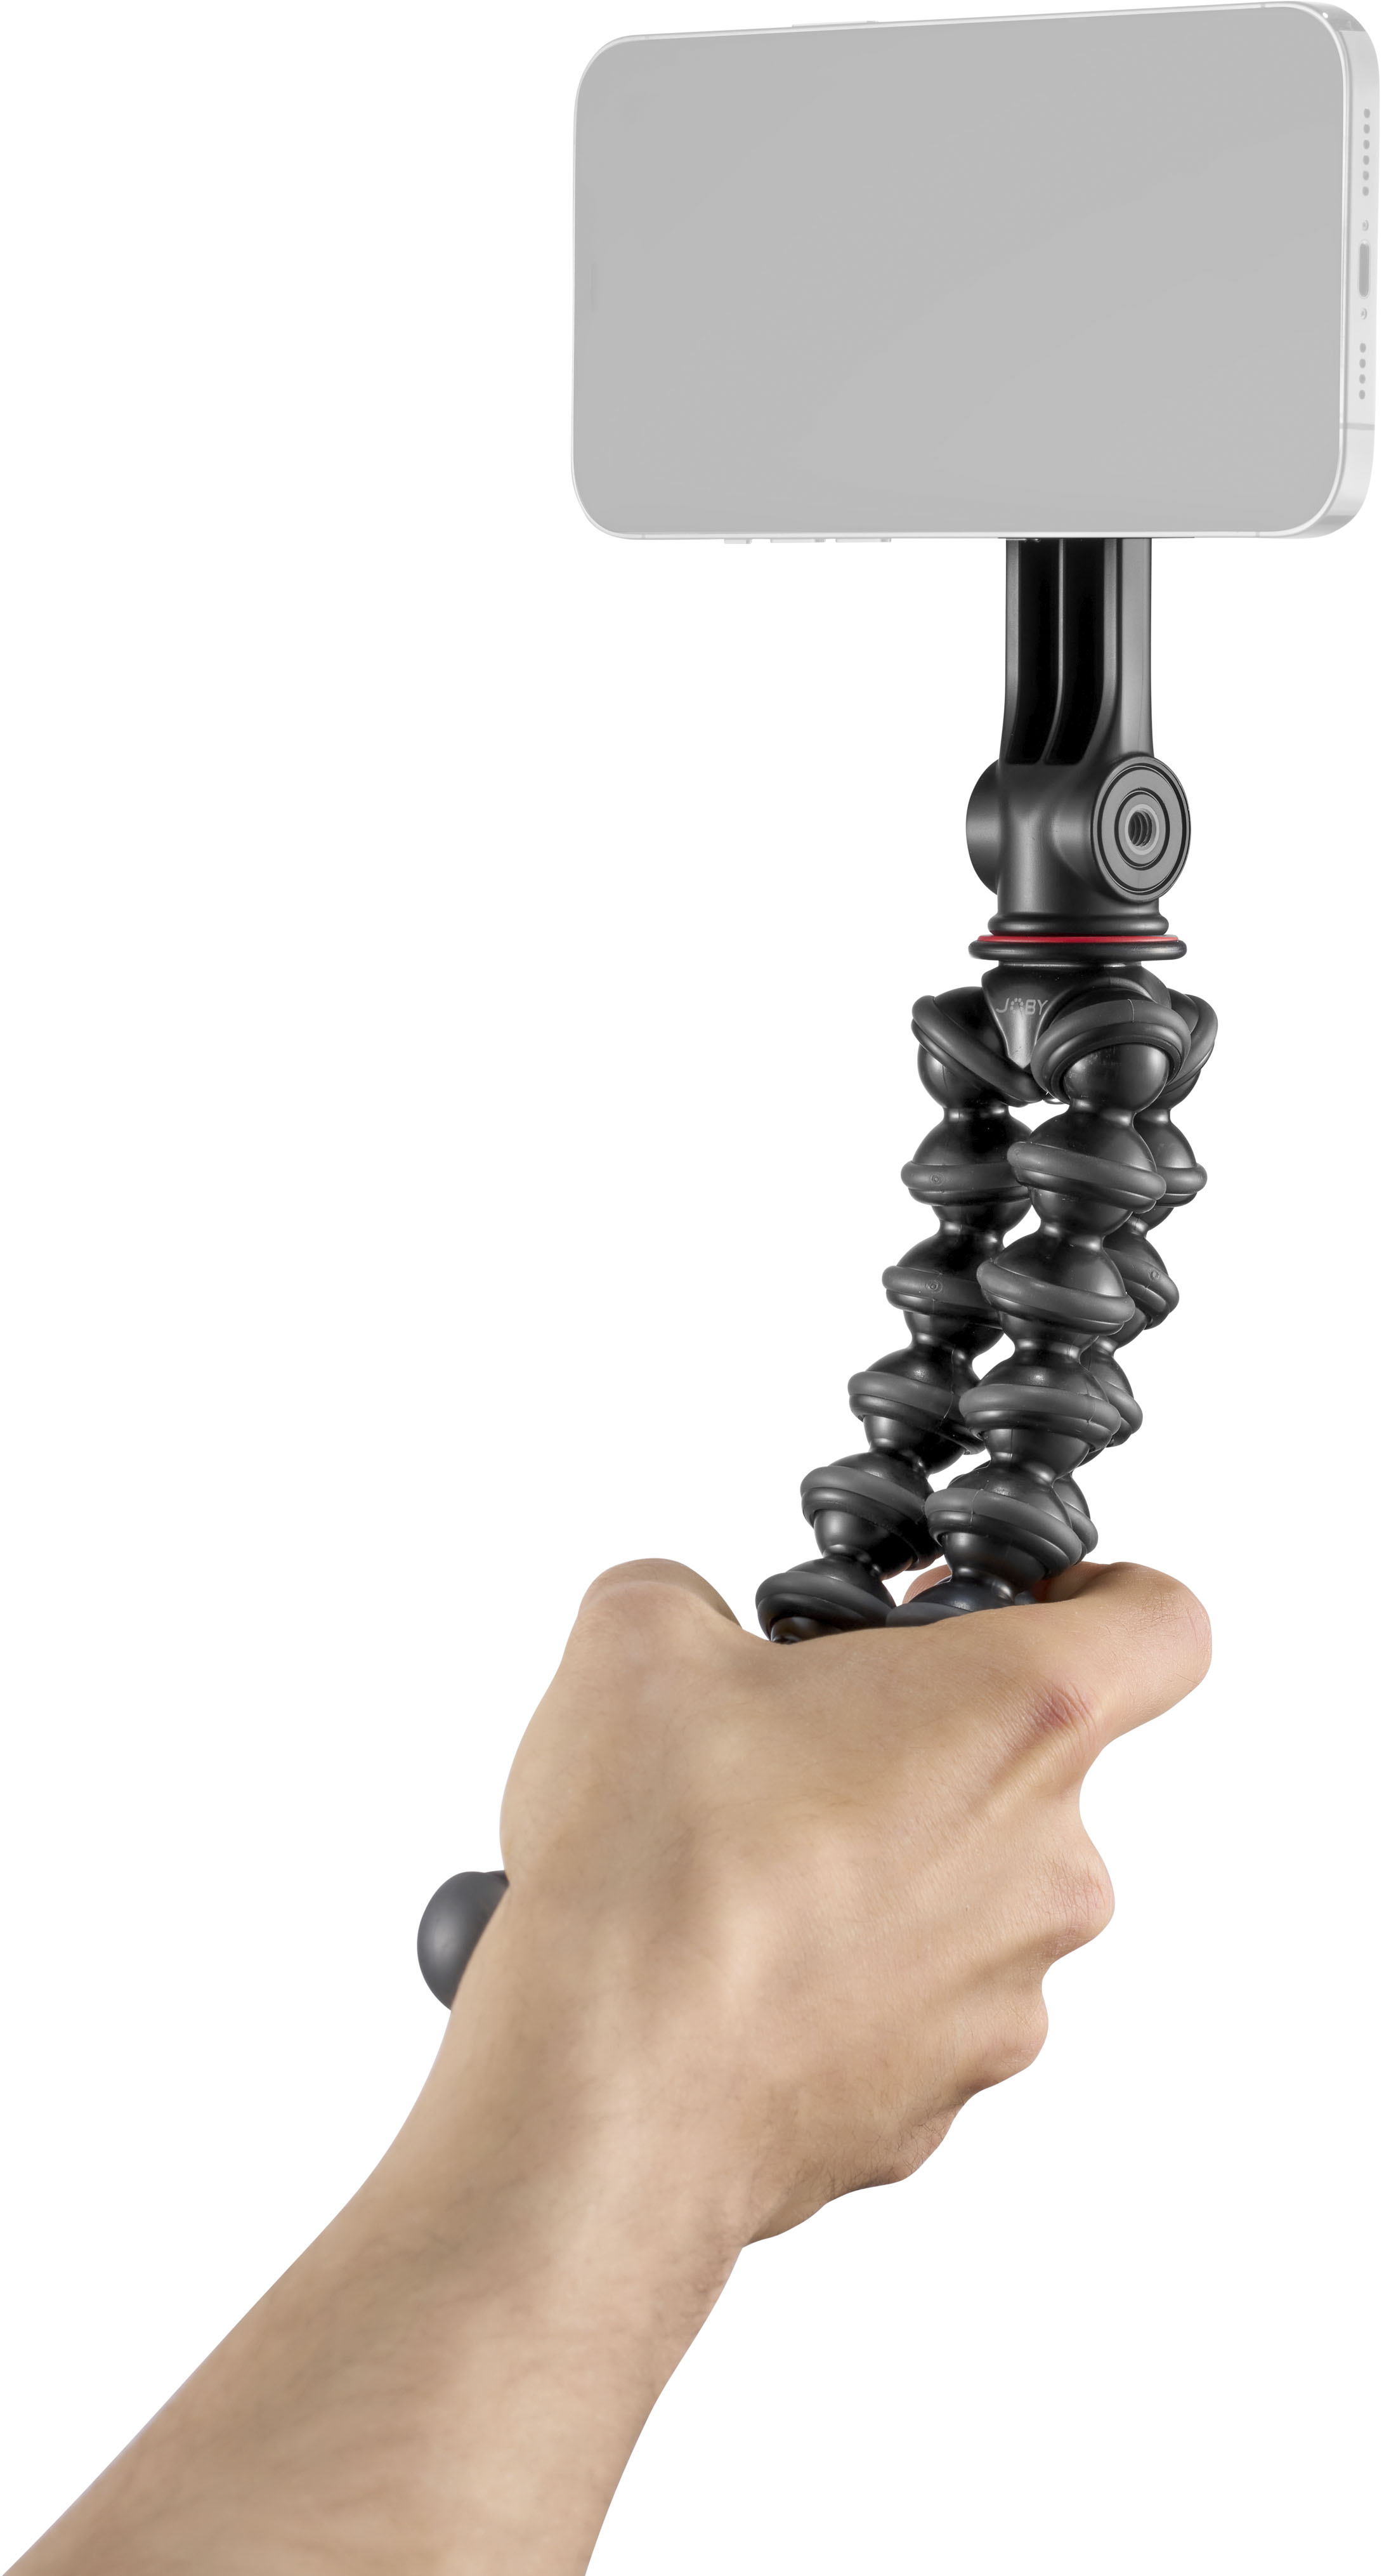 Left View: JOBY - Gorillapod Magnetic 325 Tripod - Black/Red/Charcoal